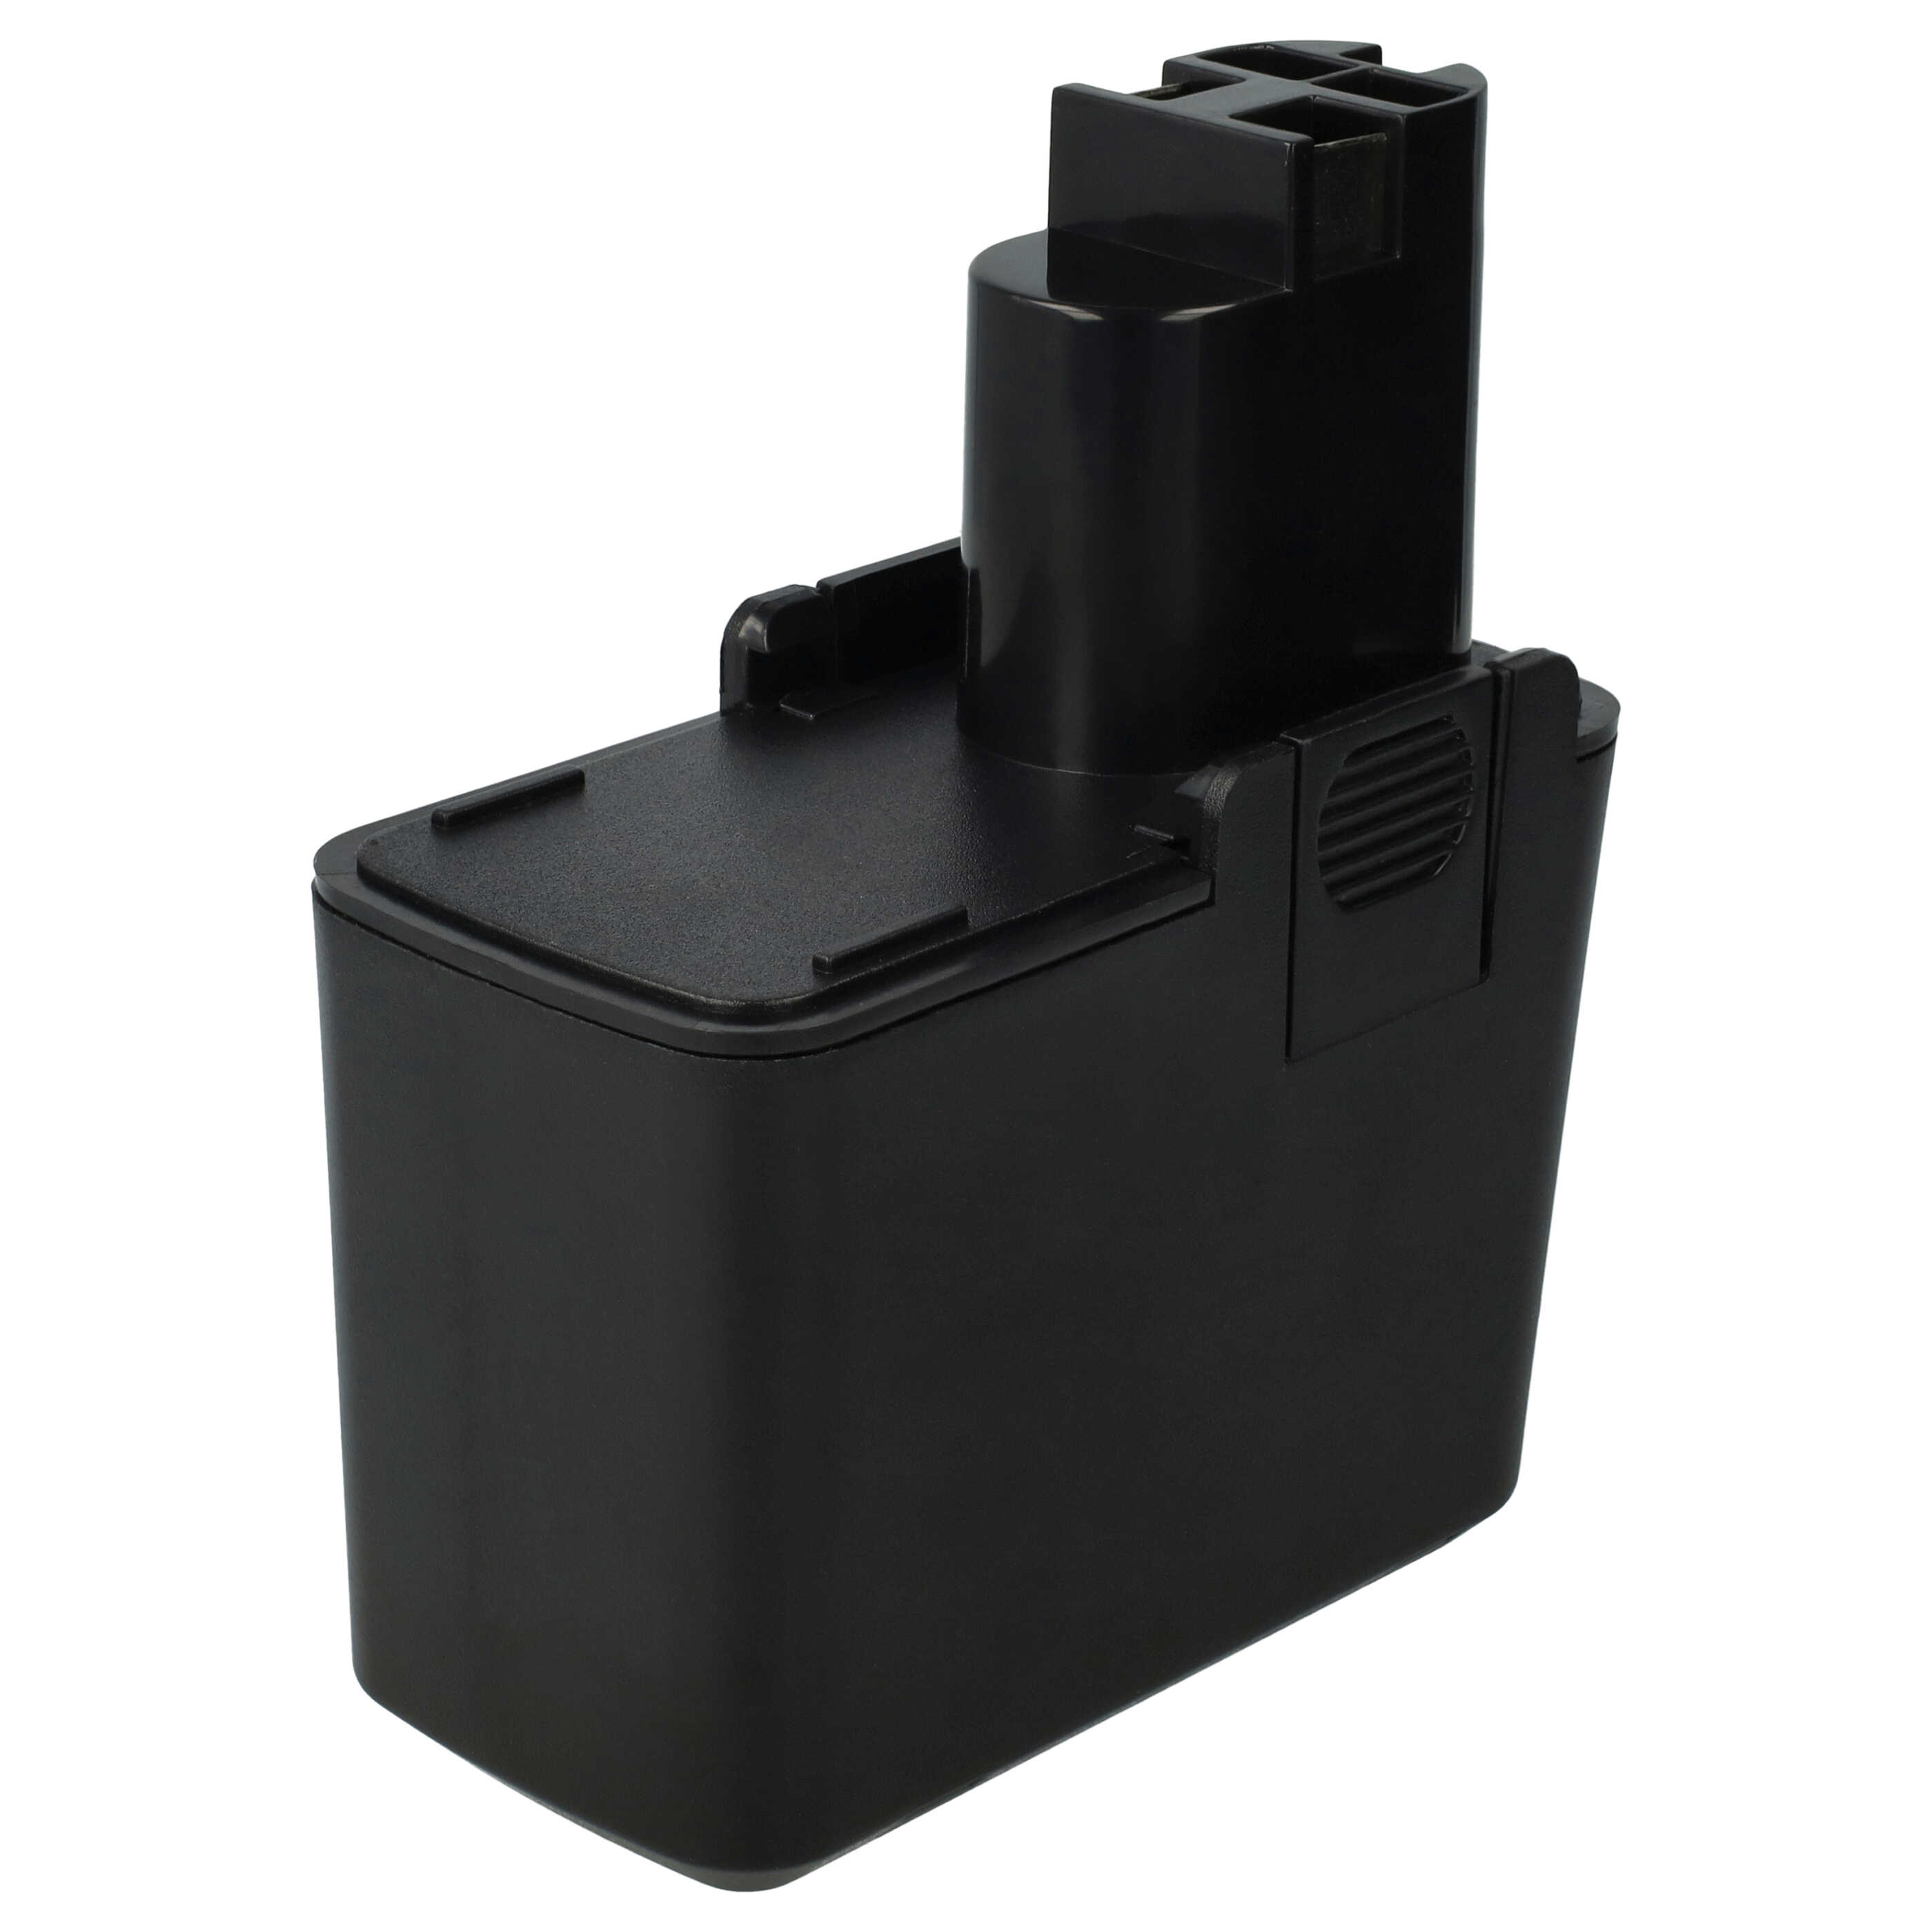 Electric Power Tool Battery Replaces Bosch 2 607 335 210, 2 607 335 160 - 2000 mAh, 14.4 V, NiMH